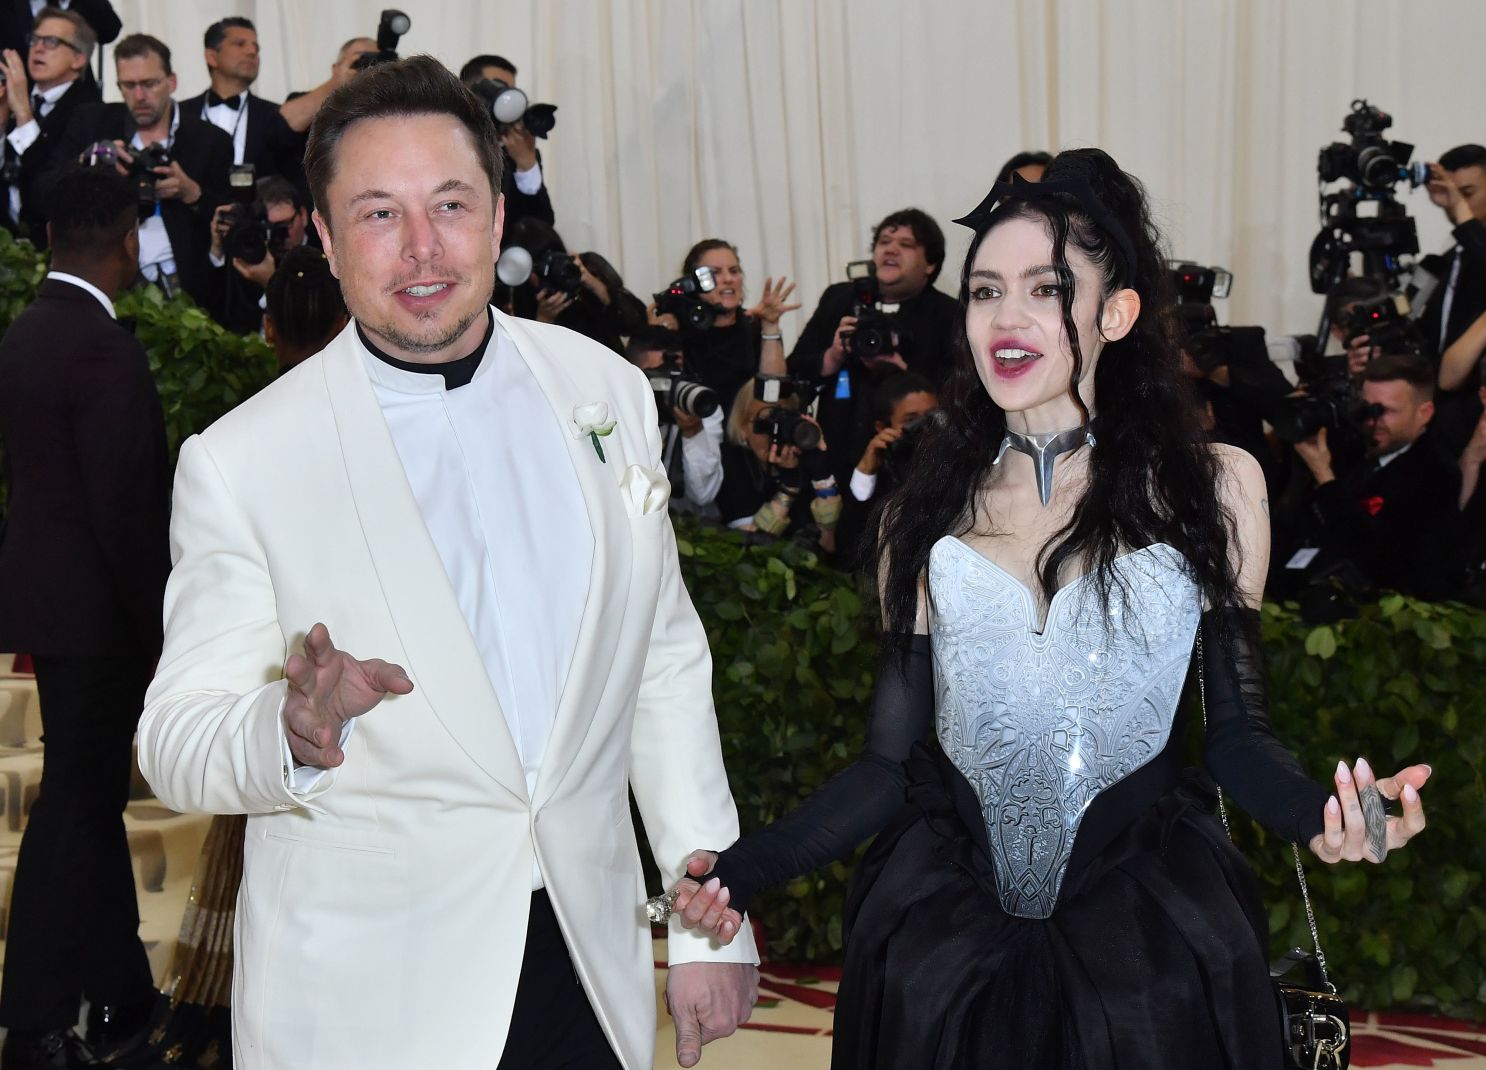 Tesla CEO Elon Musk separates from Grimes after 3 years of togetherness